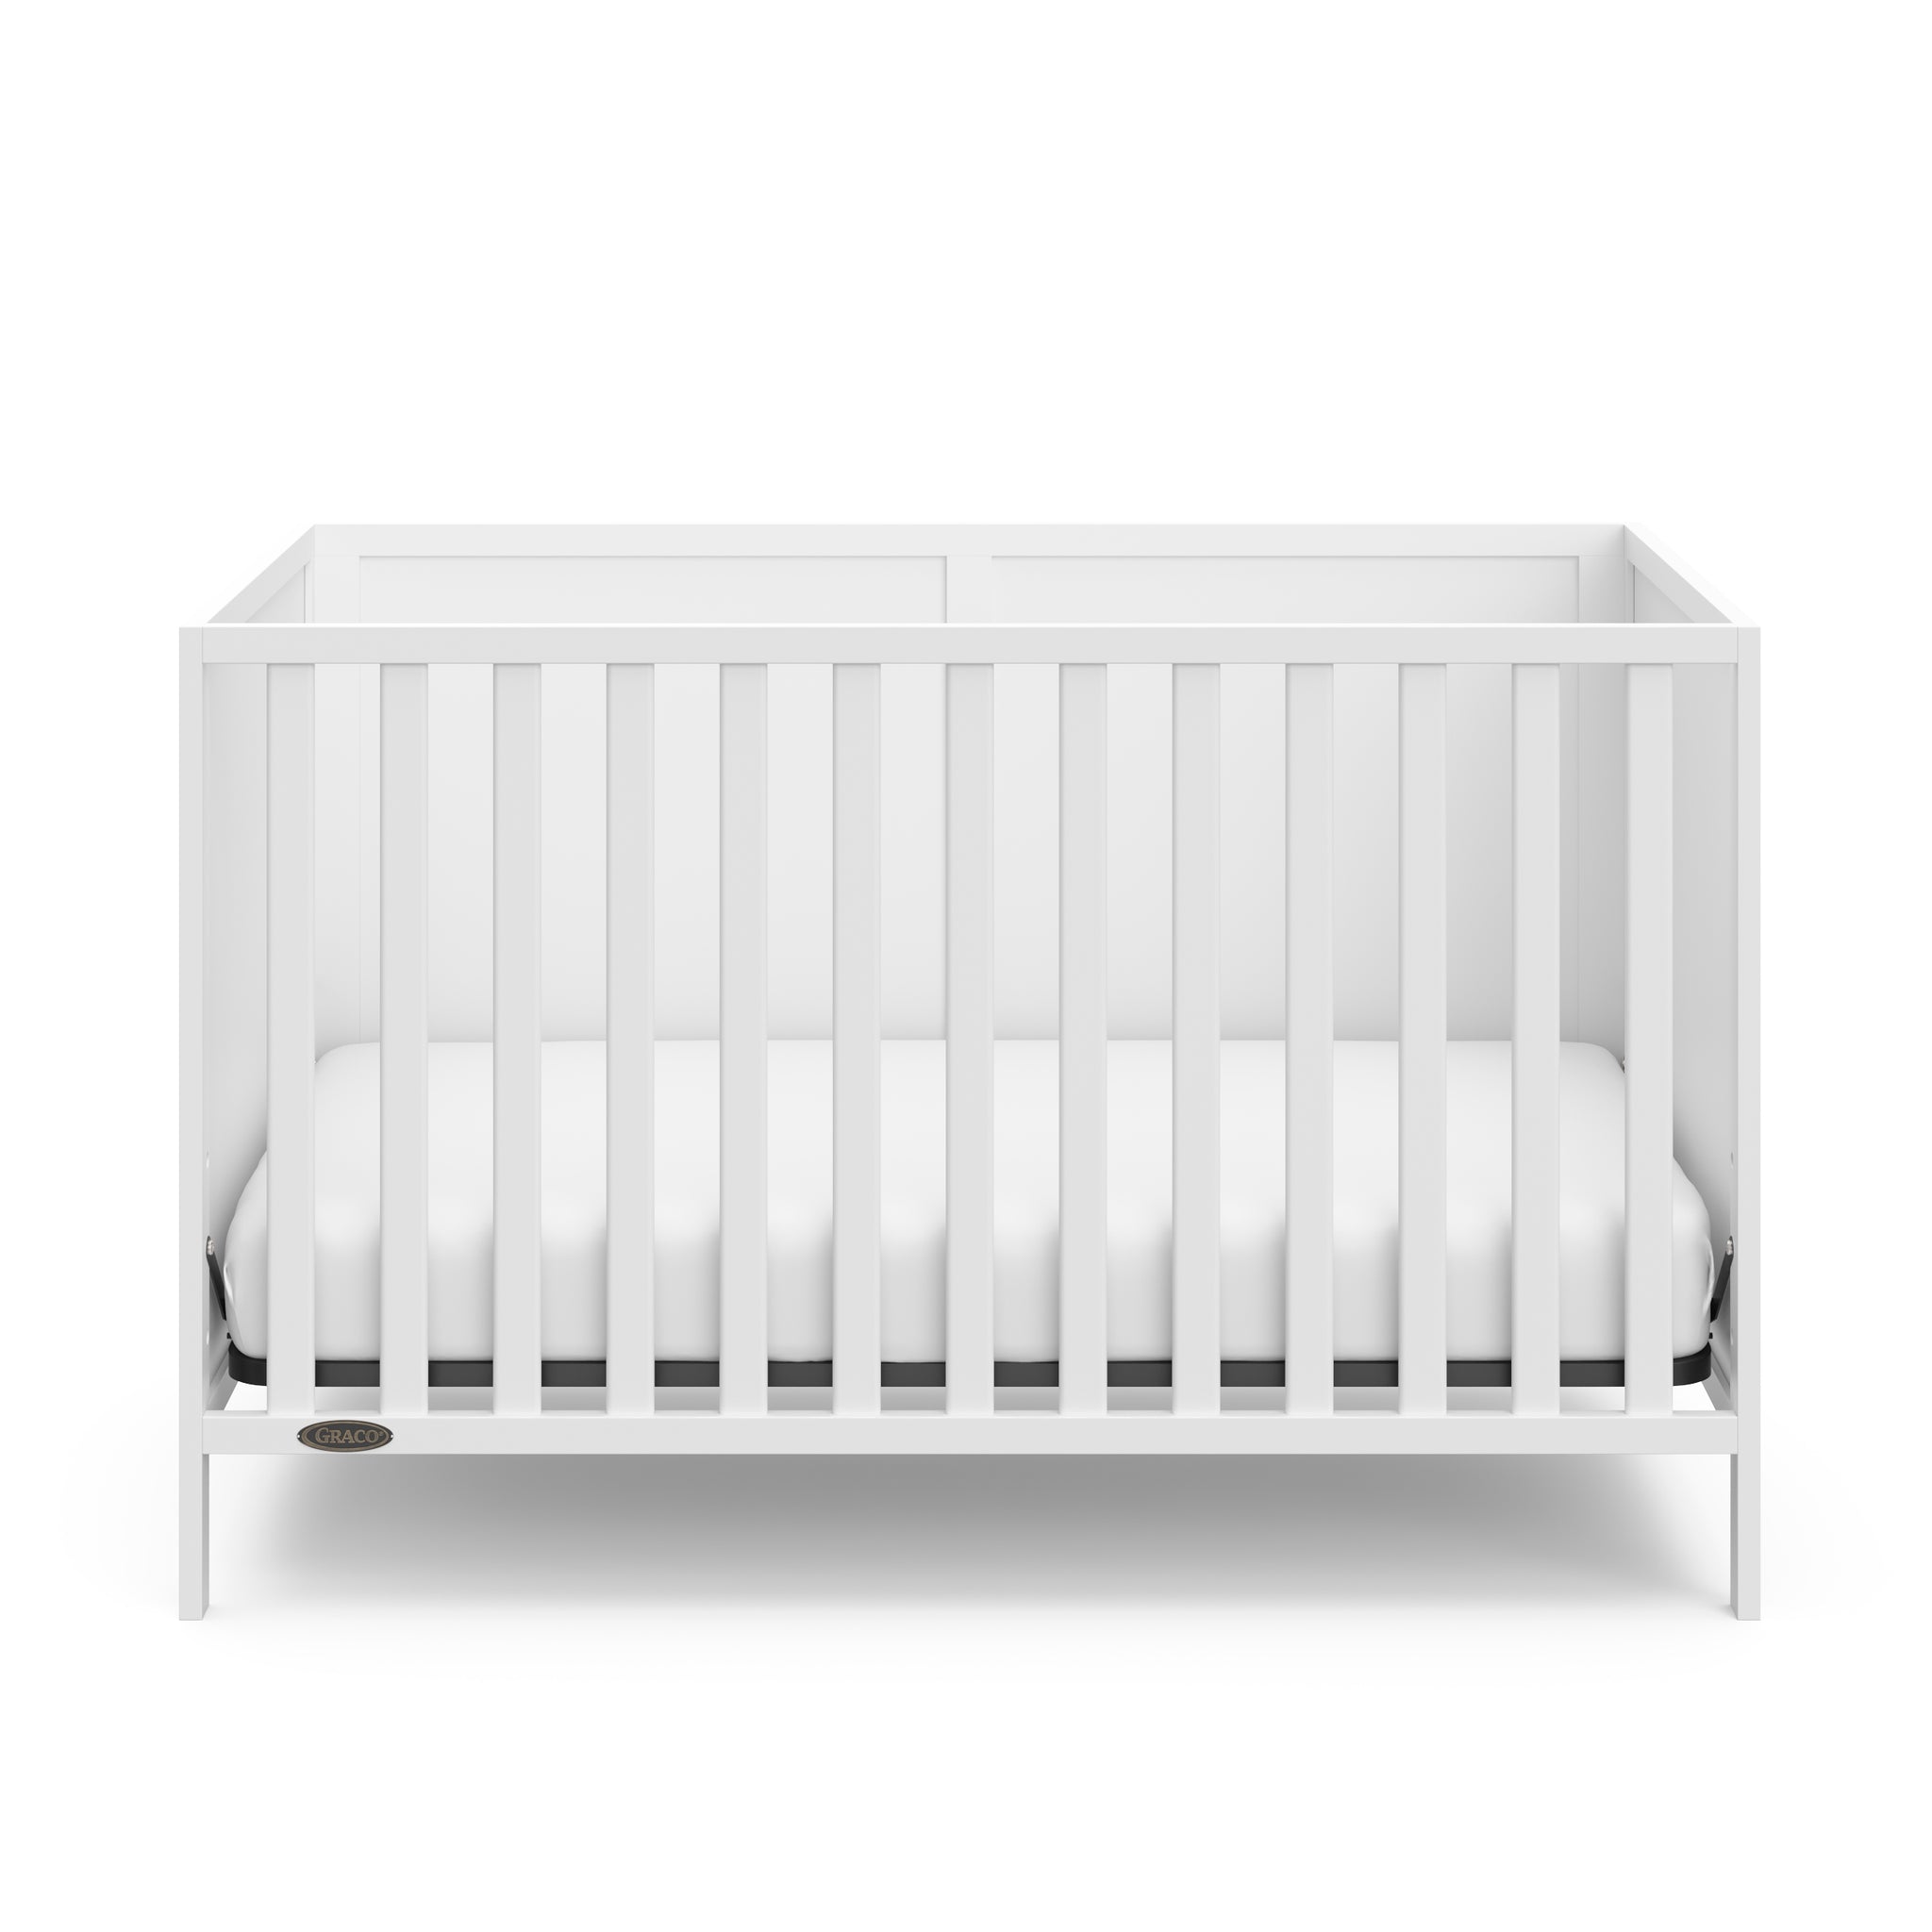 Front view of white crib